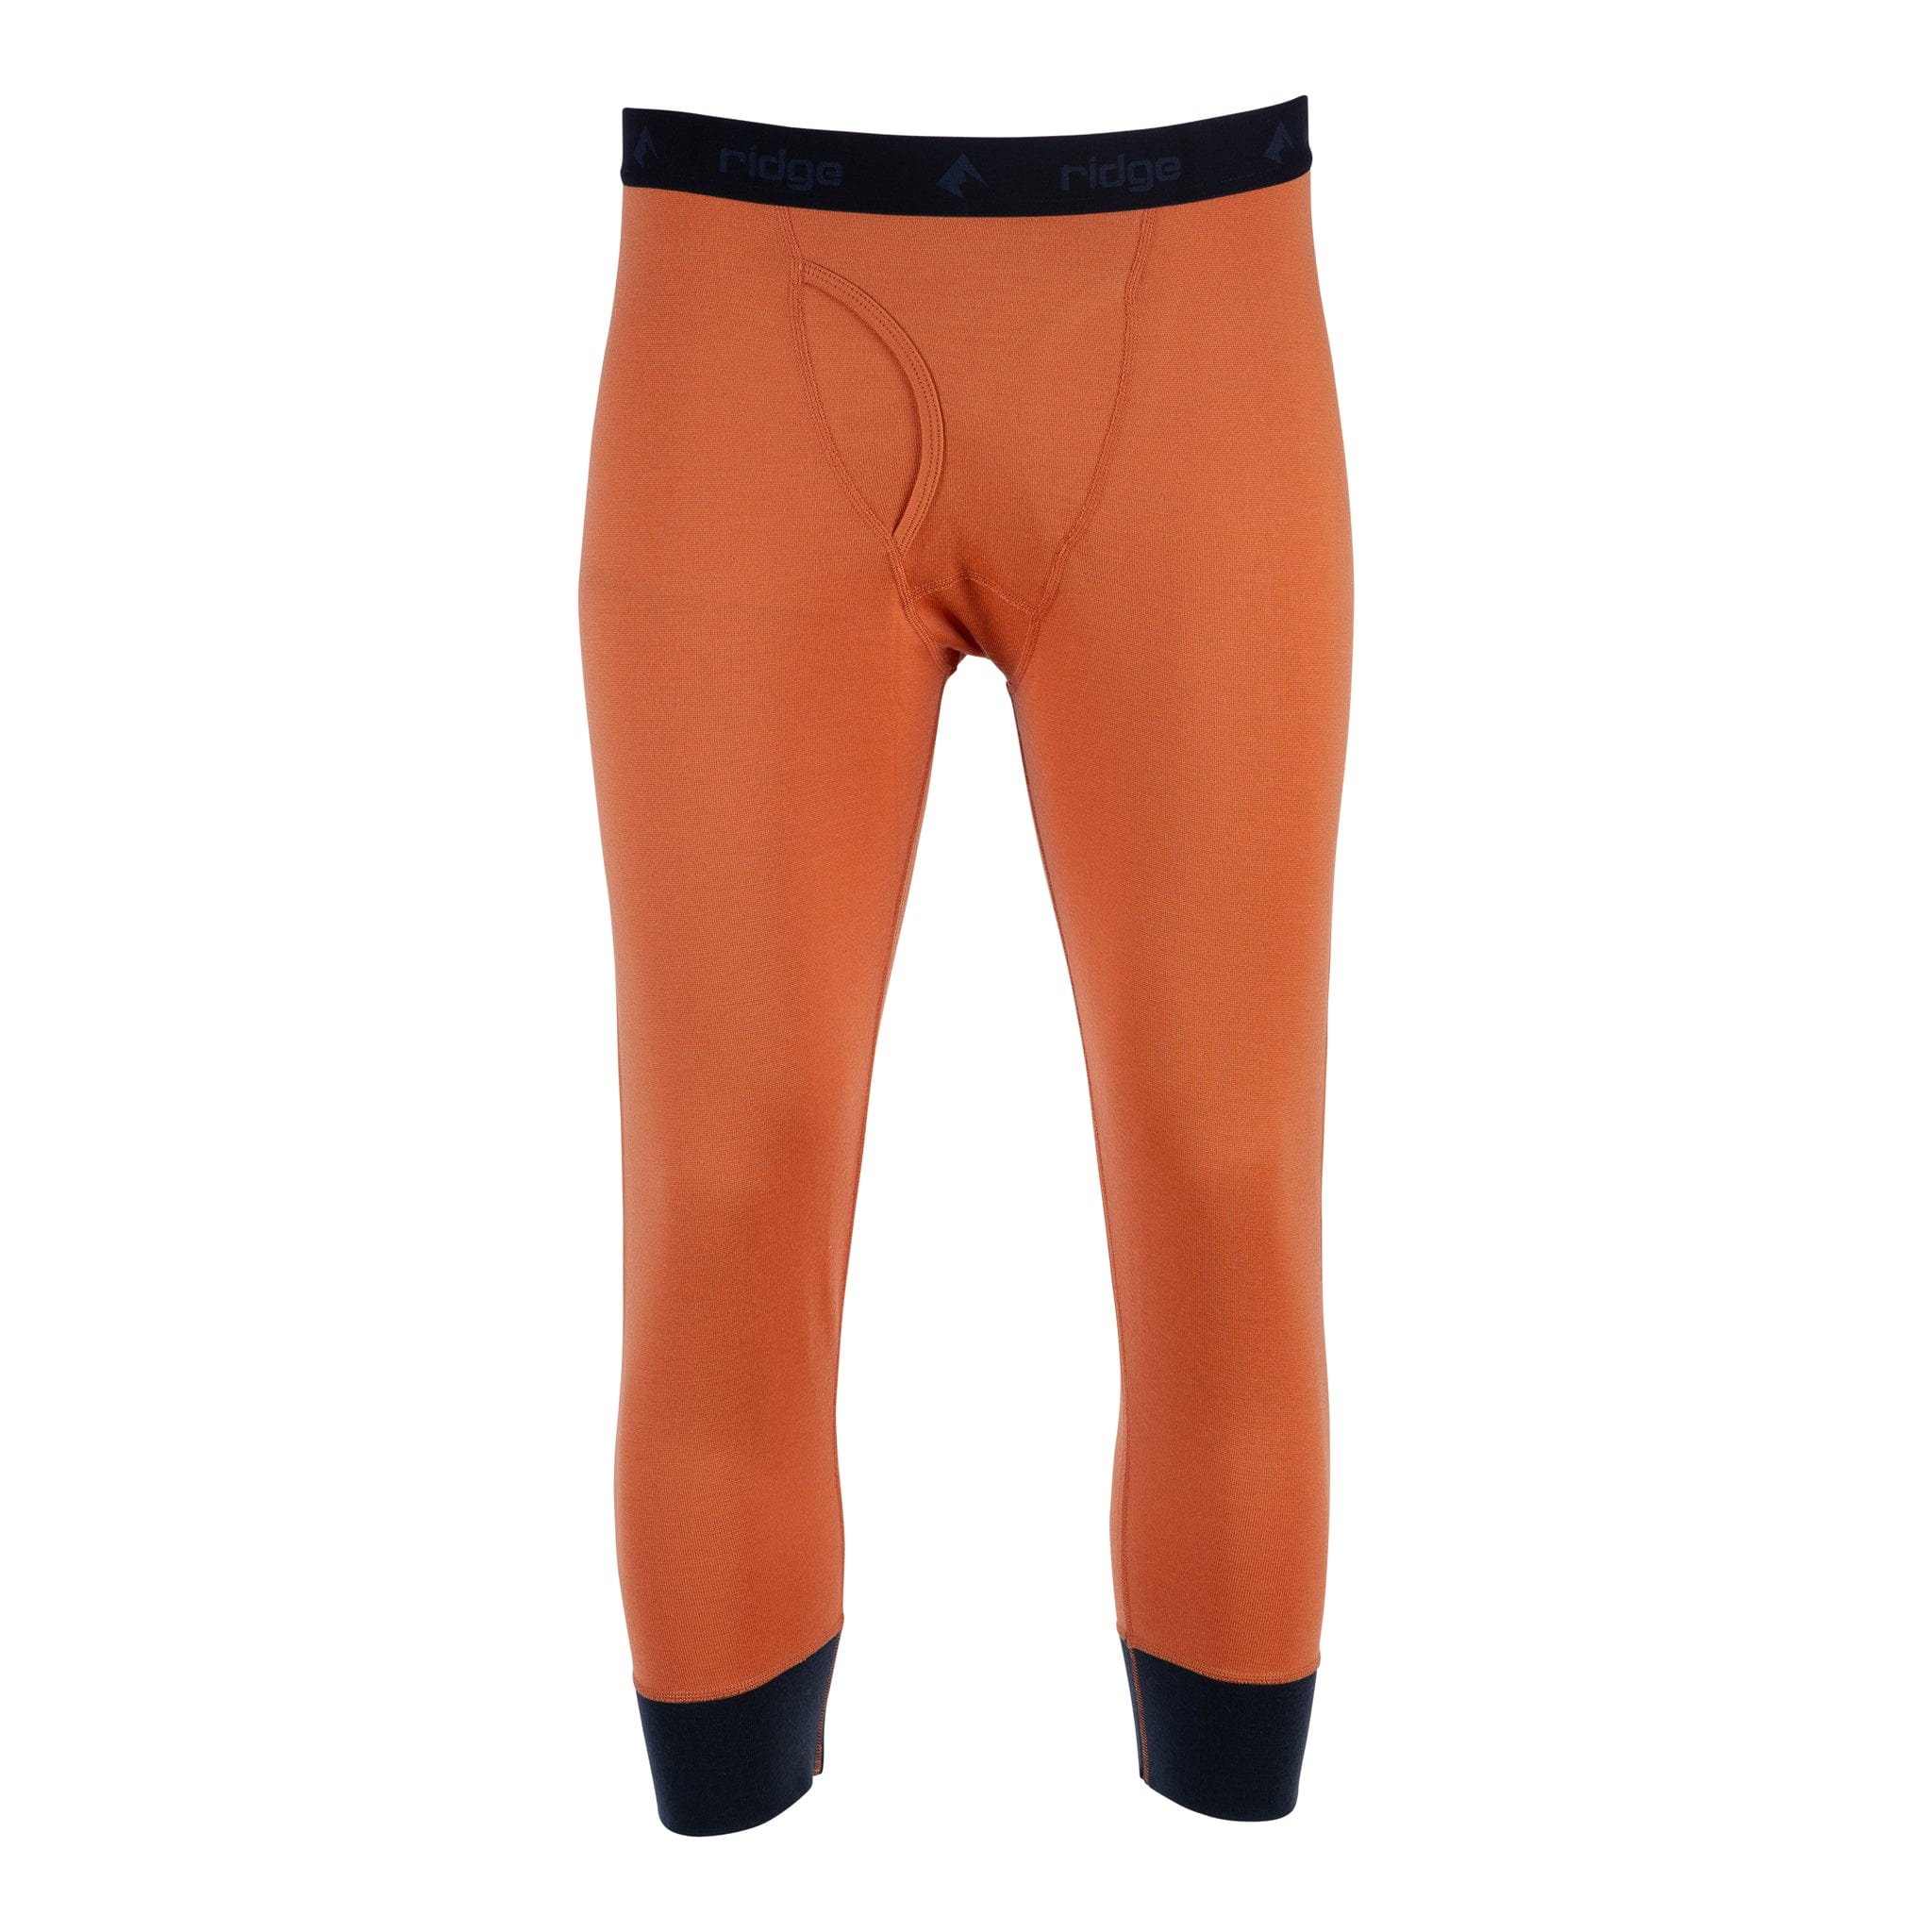 Heavy Winter Cashmere And Wool Knit Merino Wool Leggings For Men Double  Thicker, Long Knitted Pants In 201128 From Cong04, $28.93